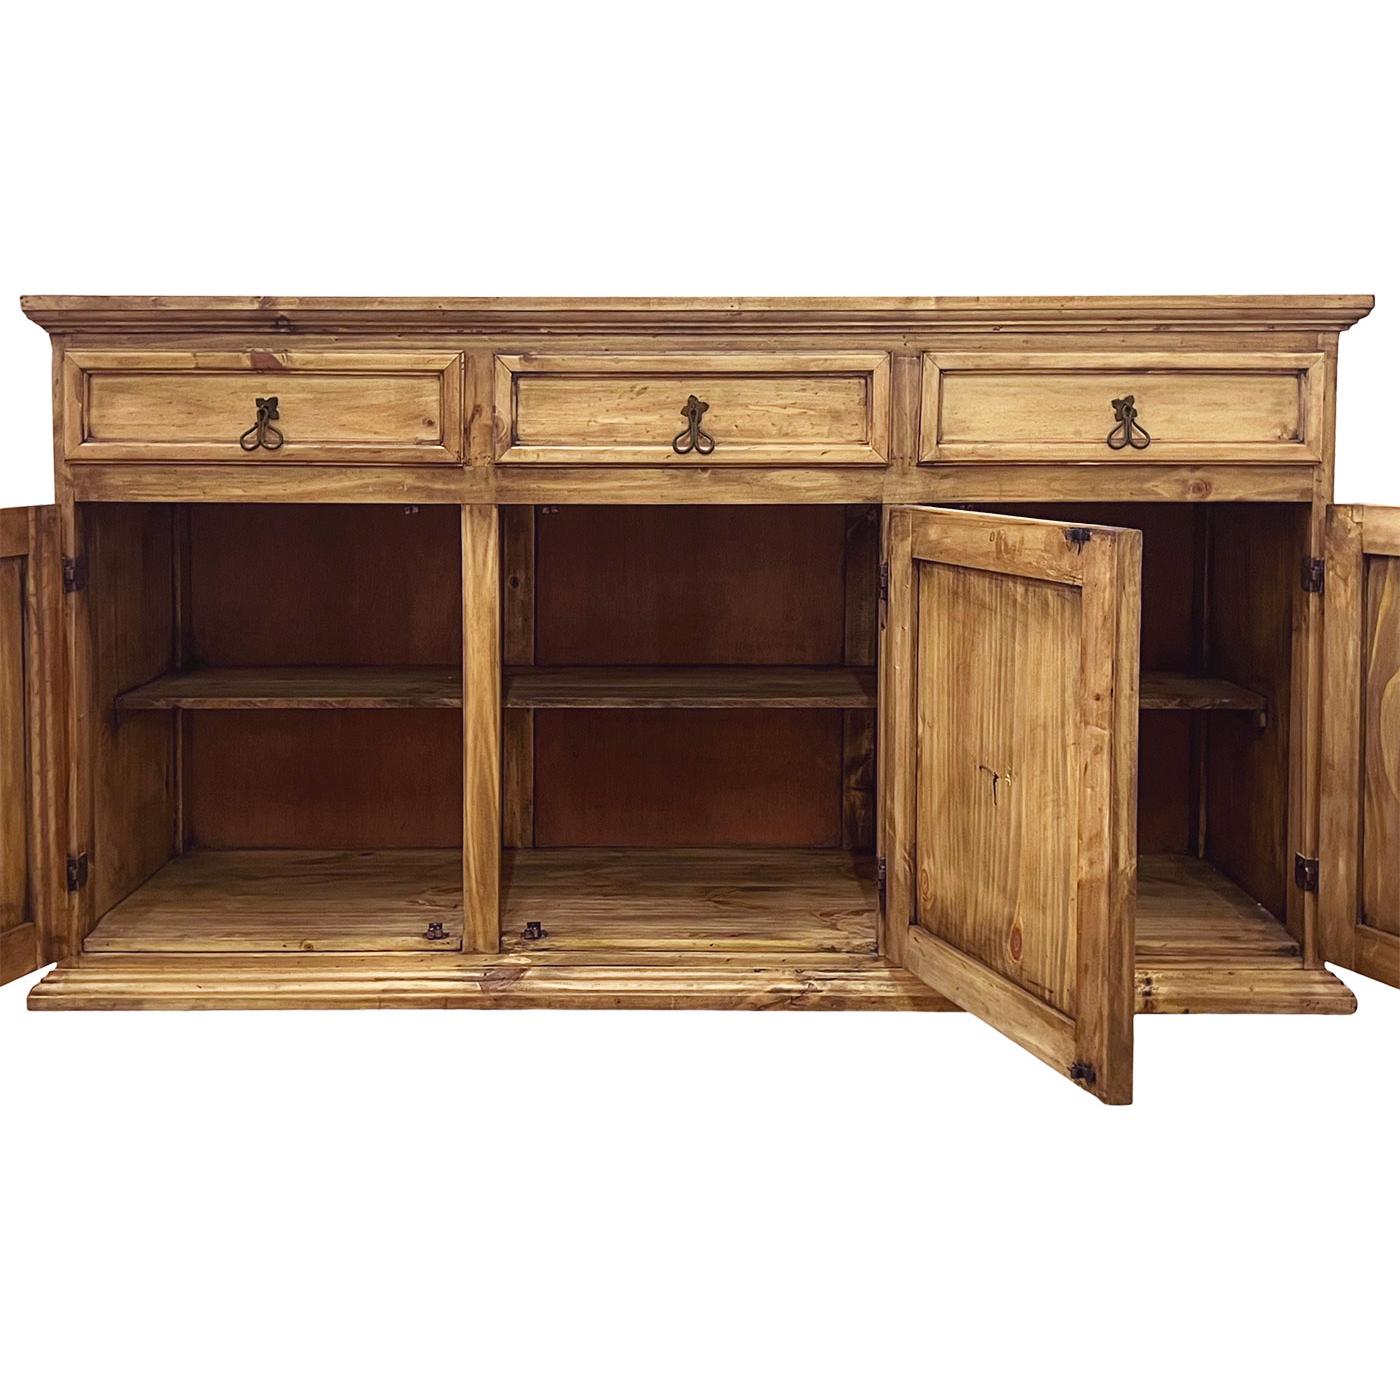 COM05-AB Large Classic Sideboard Open